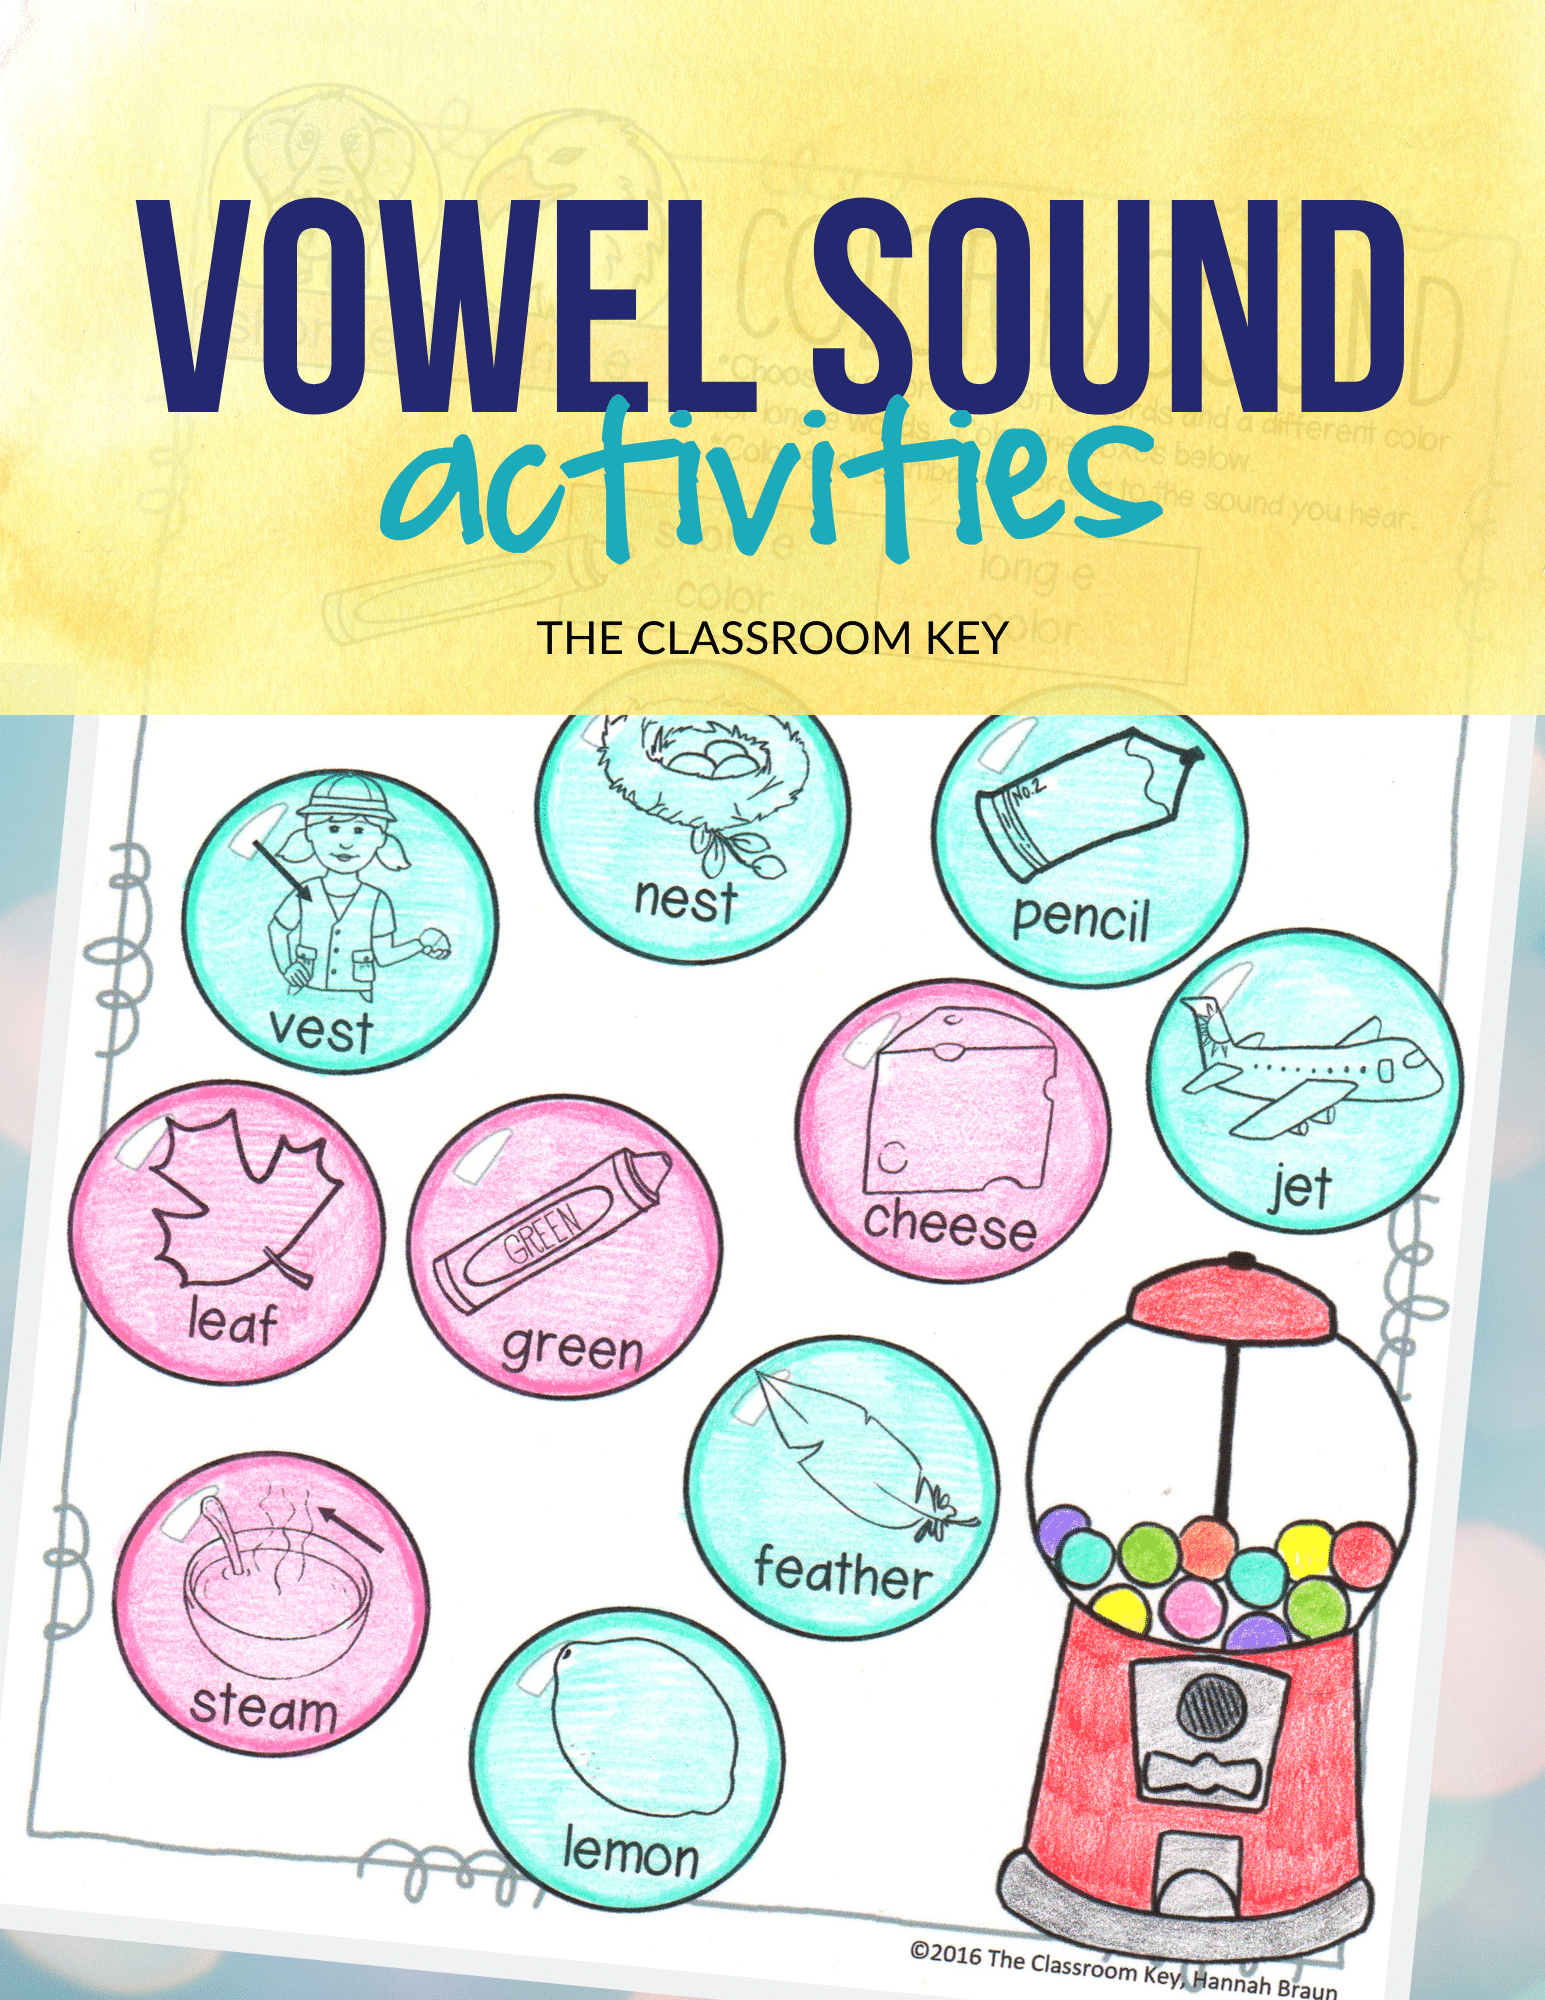 Teach long and short vowel sounds with fun activities, posters, a mini book, and assessments. Perfect for 1st grade or 2nd grade. Addresses Common Core standards RF.1.2.A and RF.2.3.A